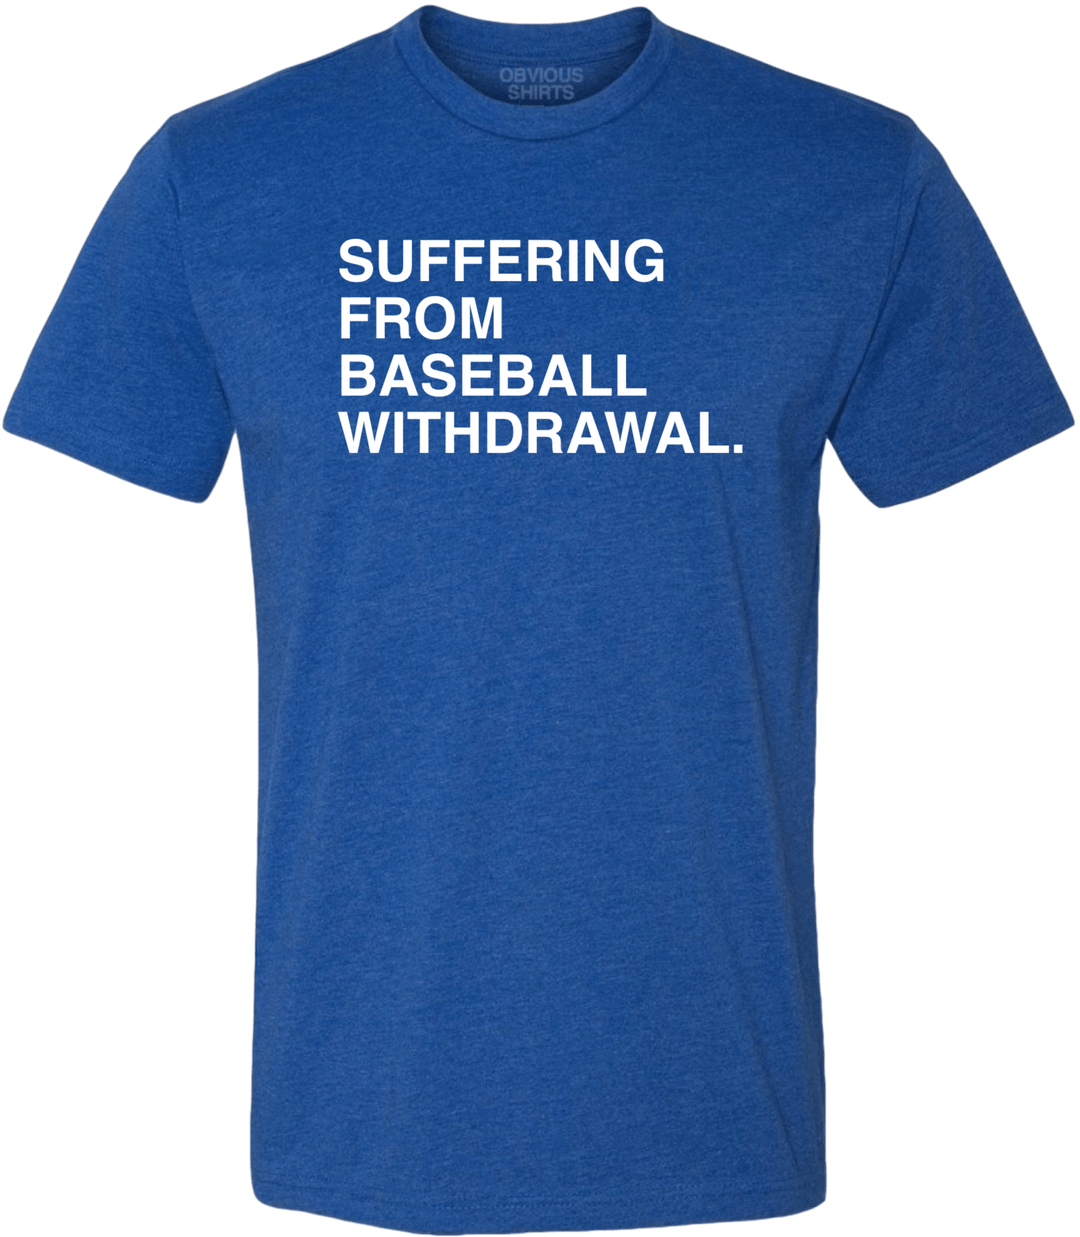 SUFFERING FROM BASEBALL WITHDRAWAL. - OBVIOUS SHIRTS.